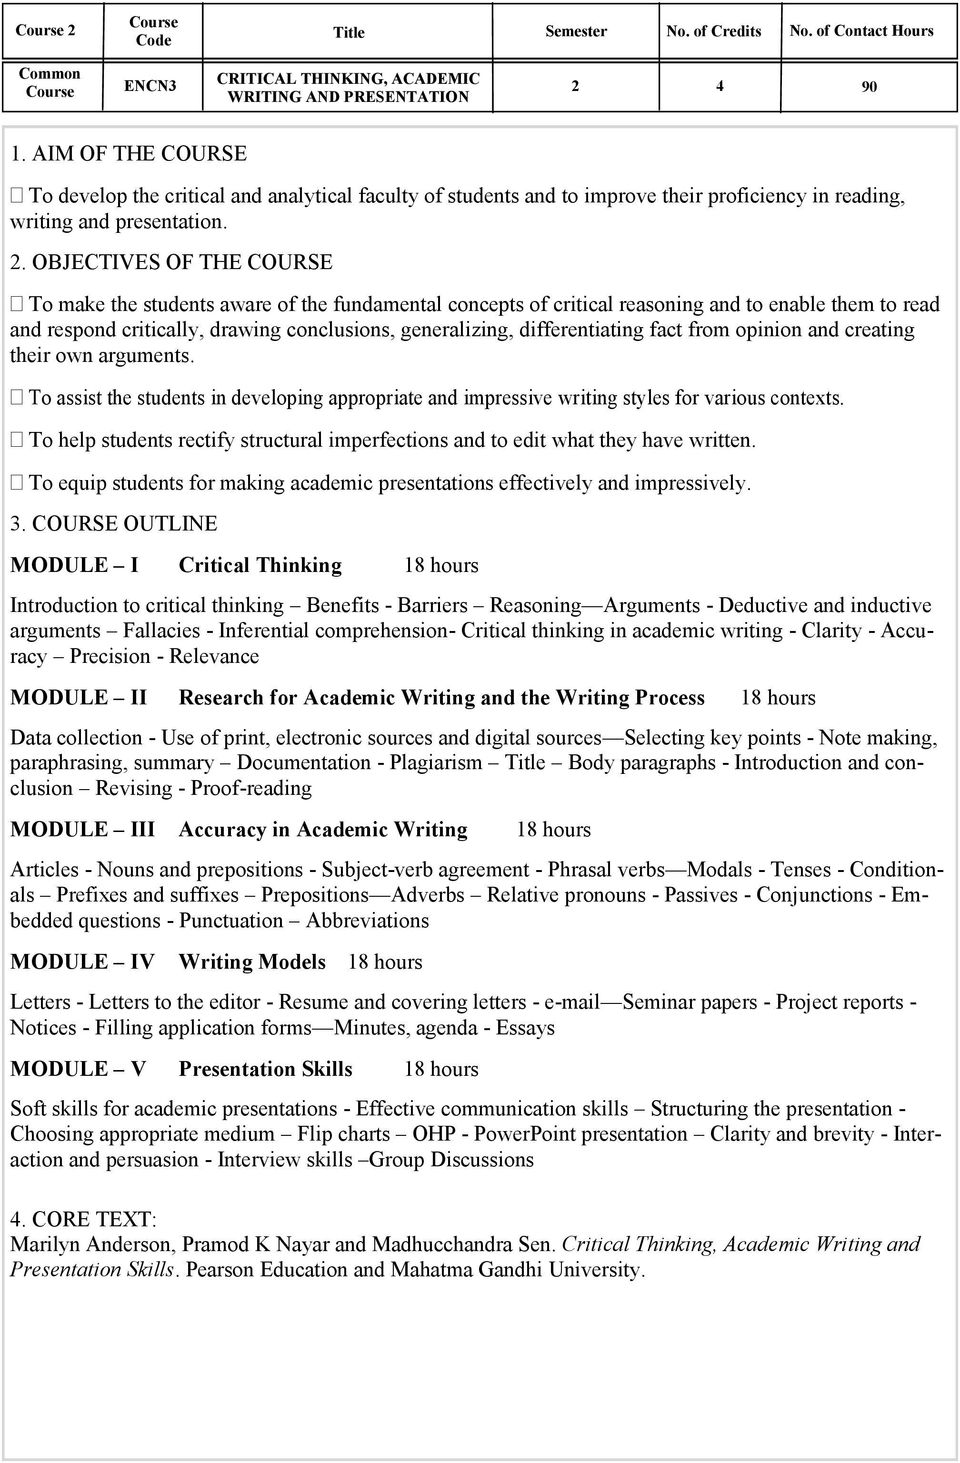 critical thinking academic writing and presentation skills question paper 2013